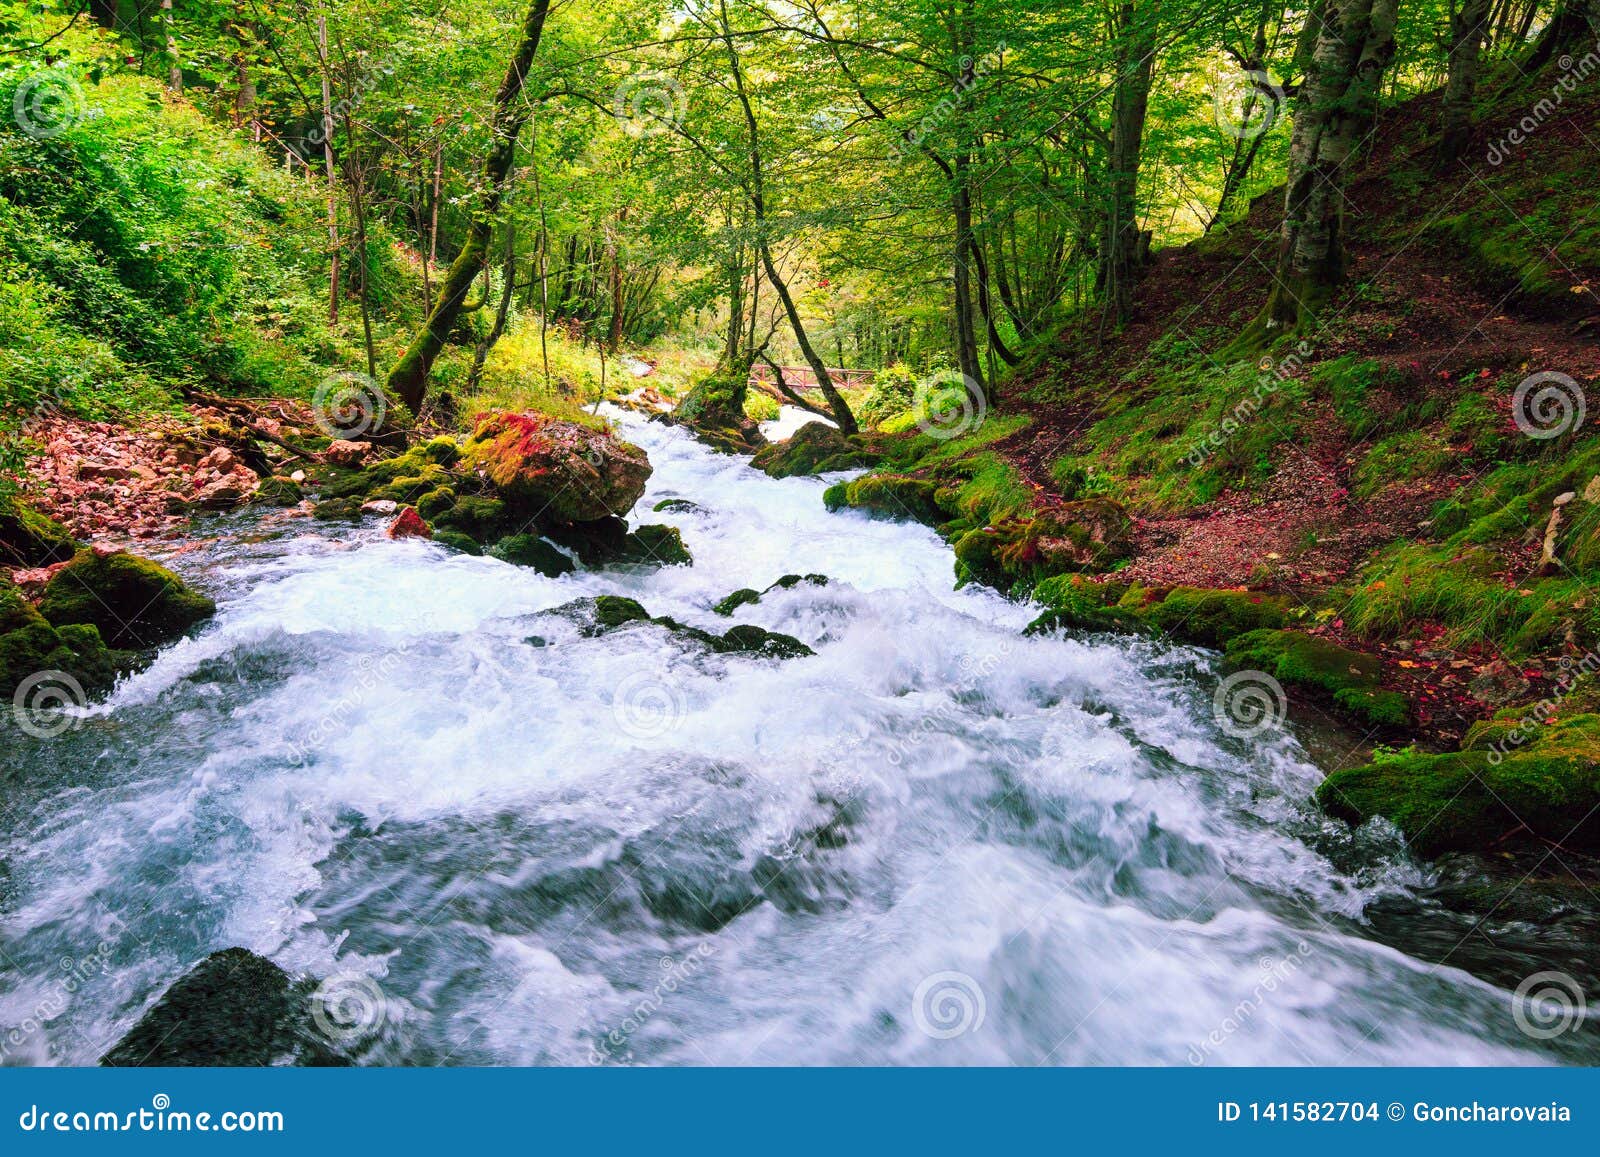 Mountain River In Autumn Colorful Forest Stock Photo Image Of